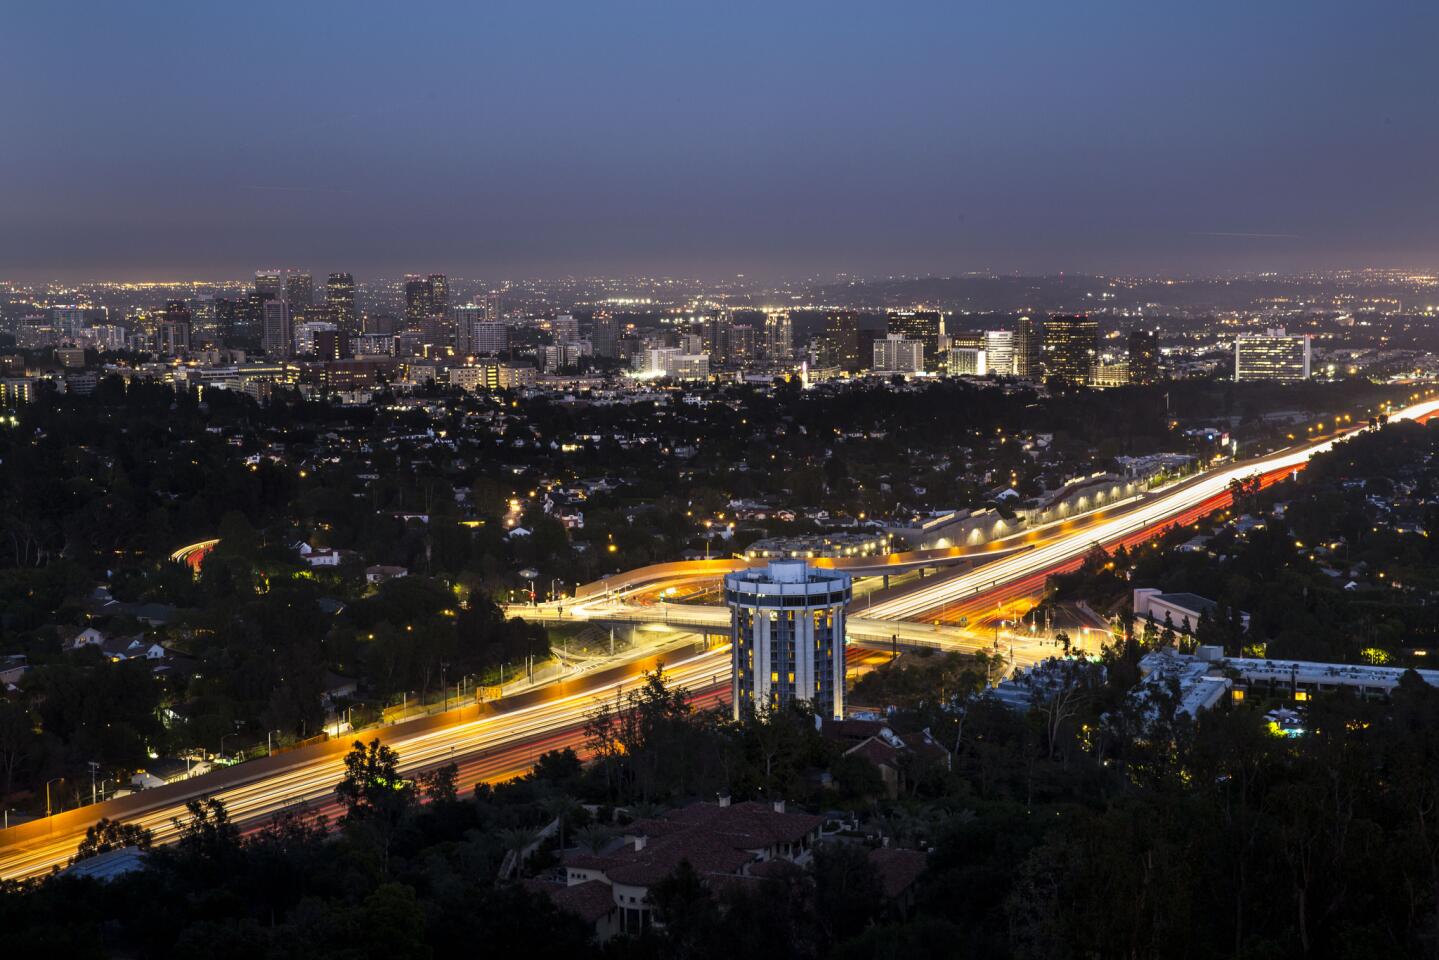 Taking a closer look at the 405 Freeway